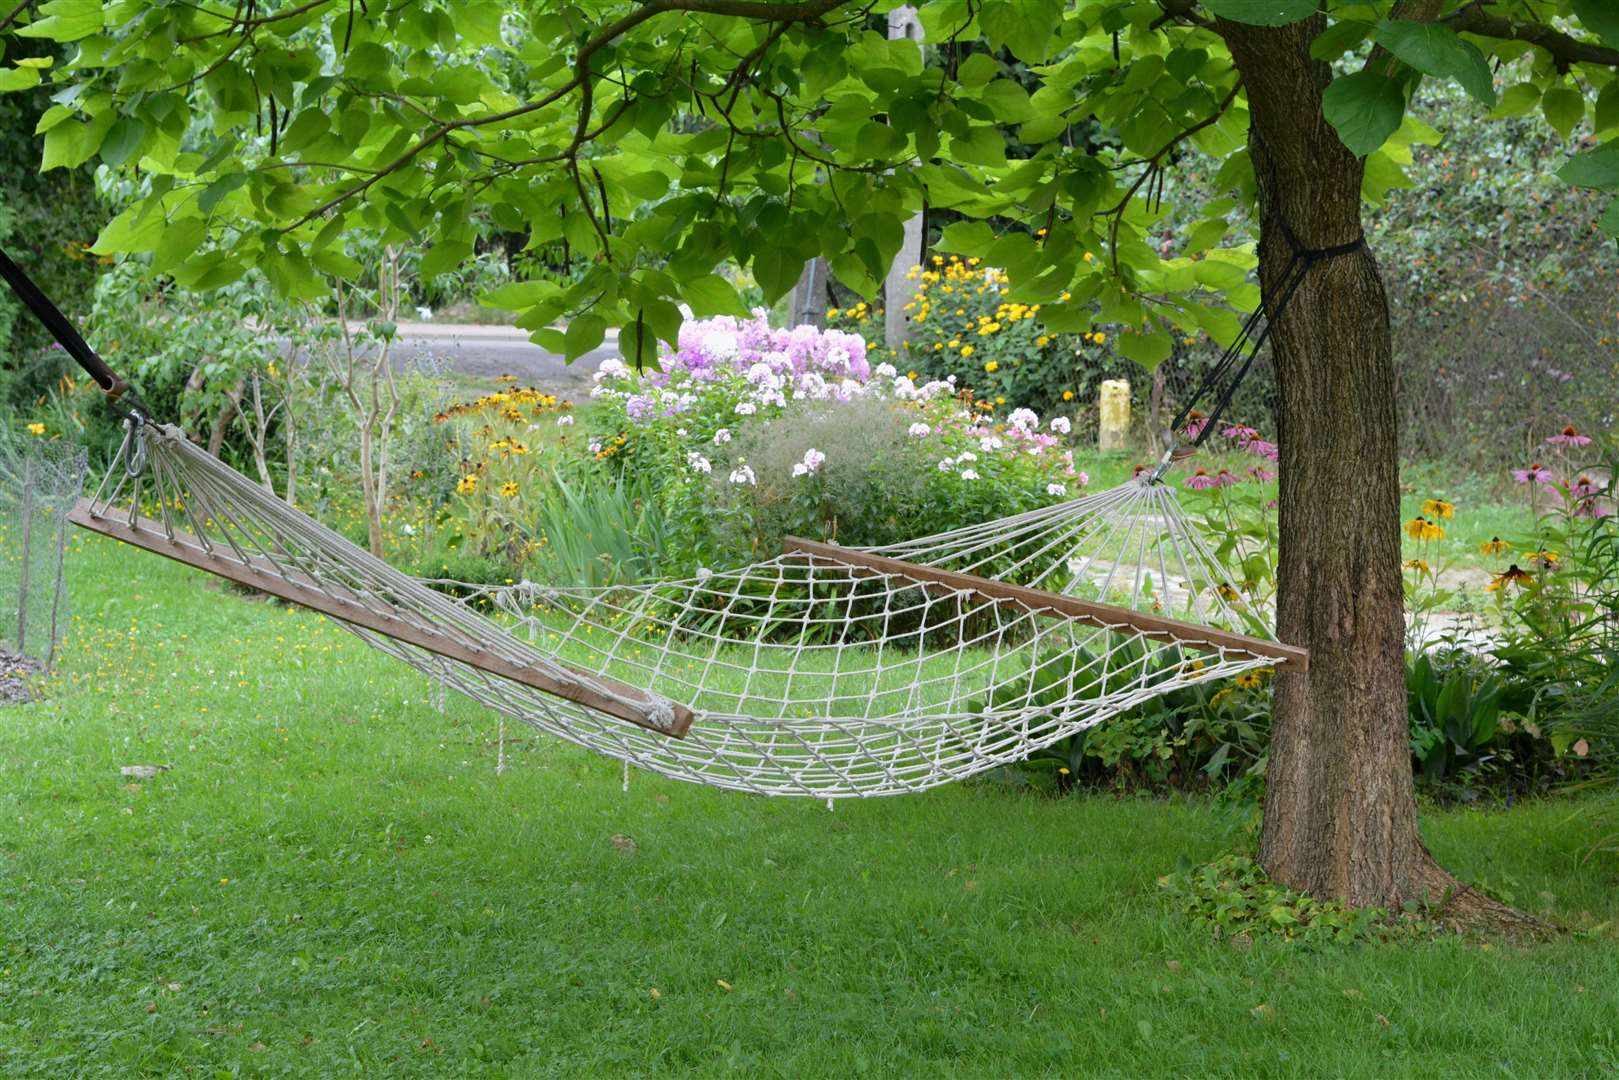 Relax in a hammock strung between trees.